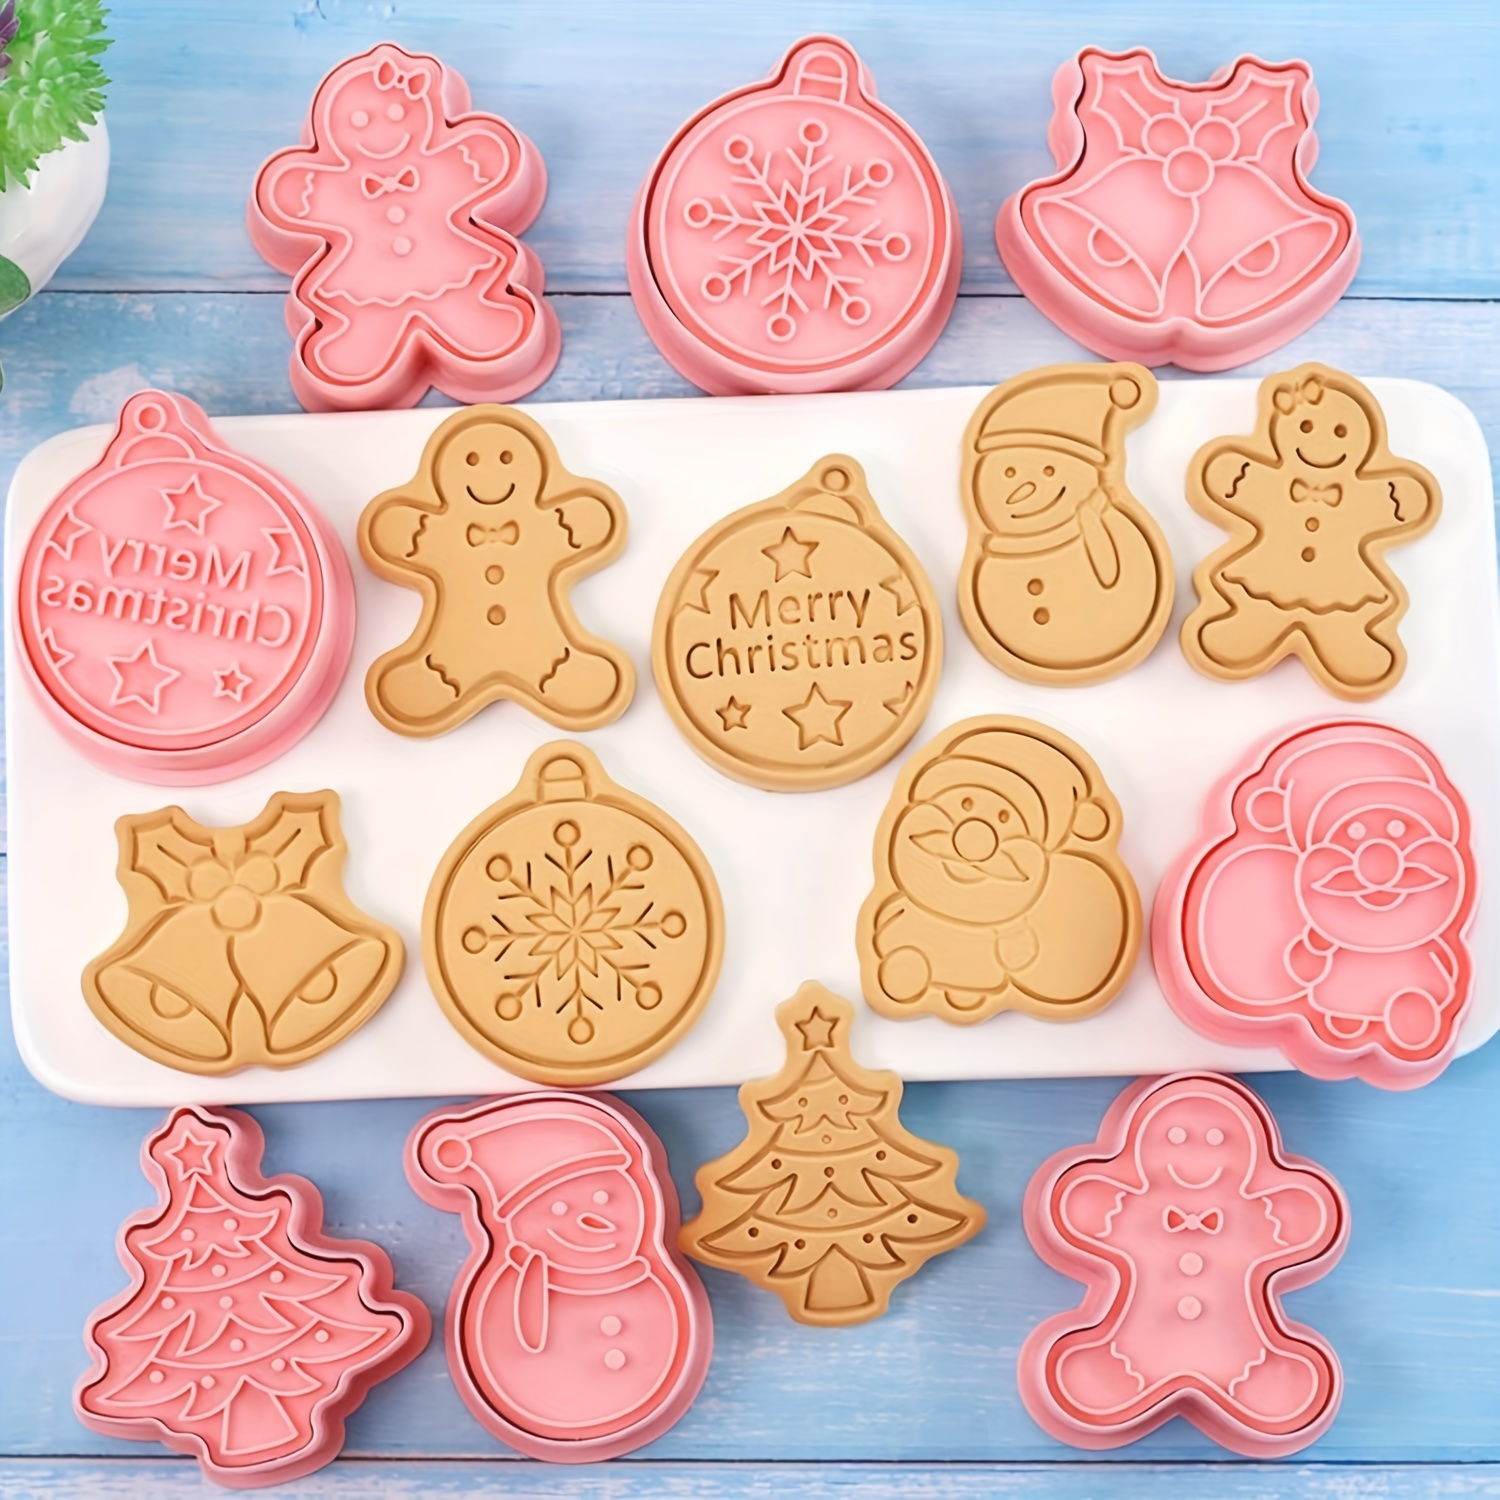 8pcs Christmas Cookies Mold Set, 3d Embossed Cookies Cutter Press Molds,  Including Christmas Tree, Snowman, Bell, Snowflakes, Santa Claus Pattern,  Pink, Suitable For Christmas Baking